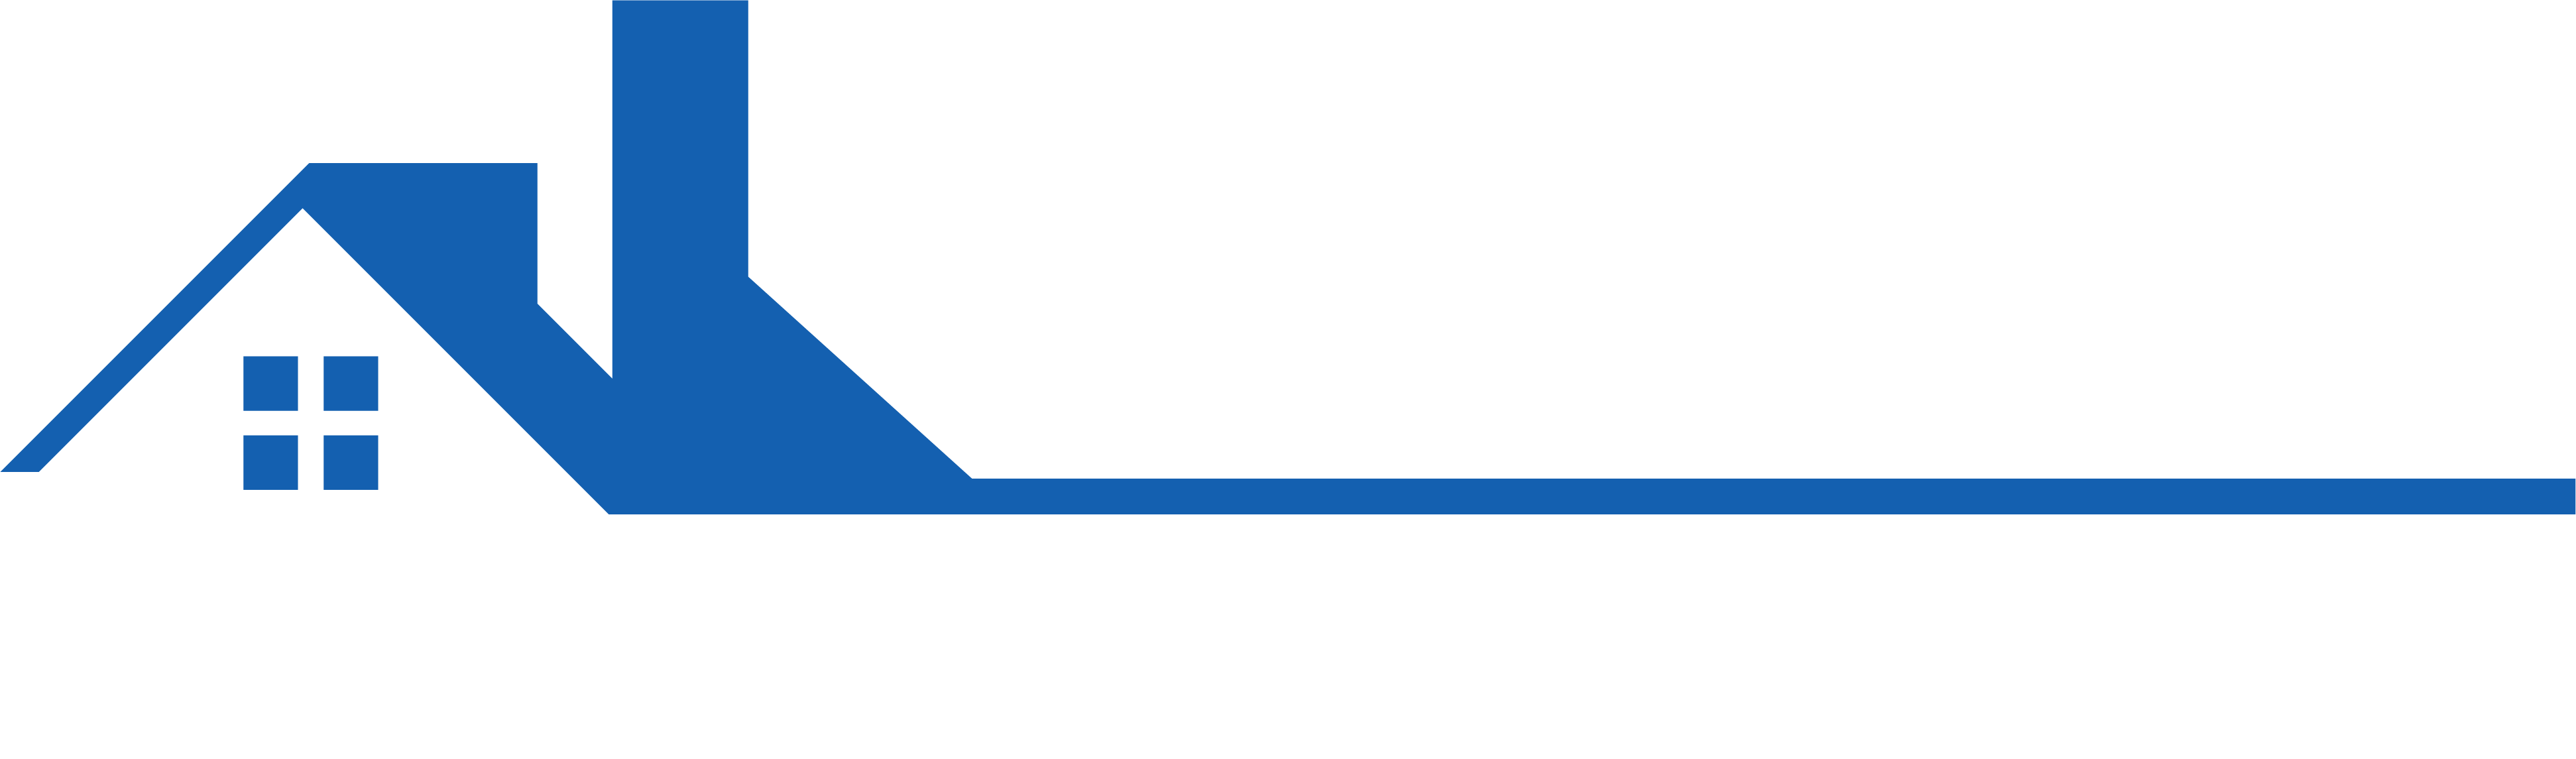 Bunting Appraisal Services